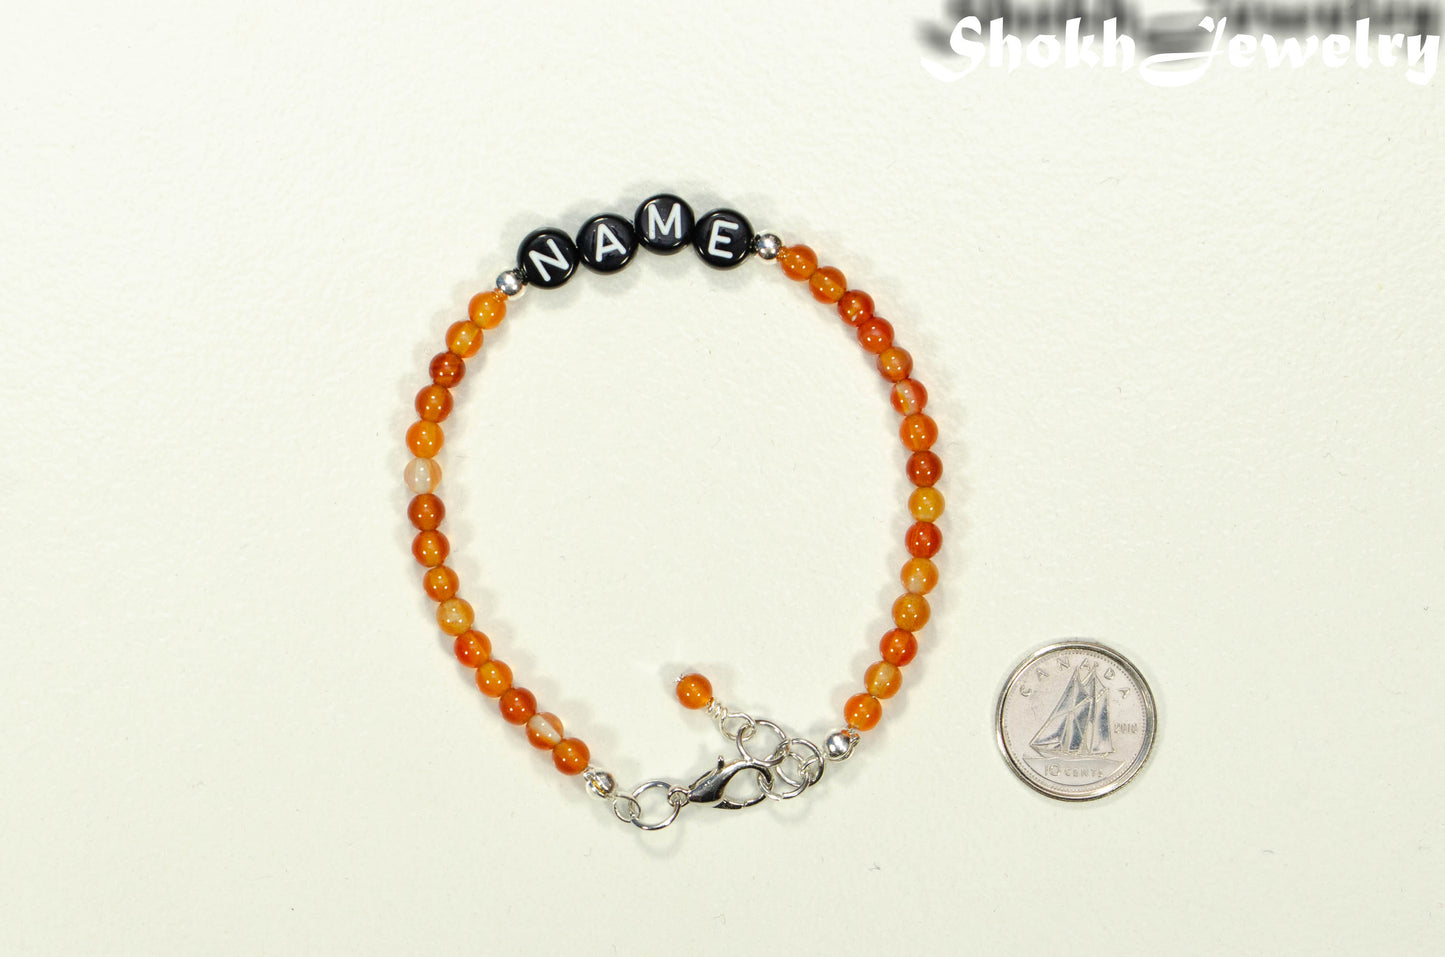 Personalized Carnelian Crystal Name Bracelet with Clasp beside a dime.